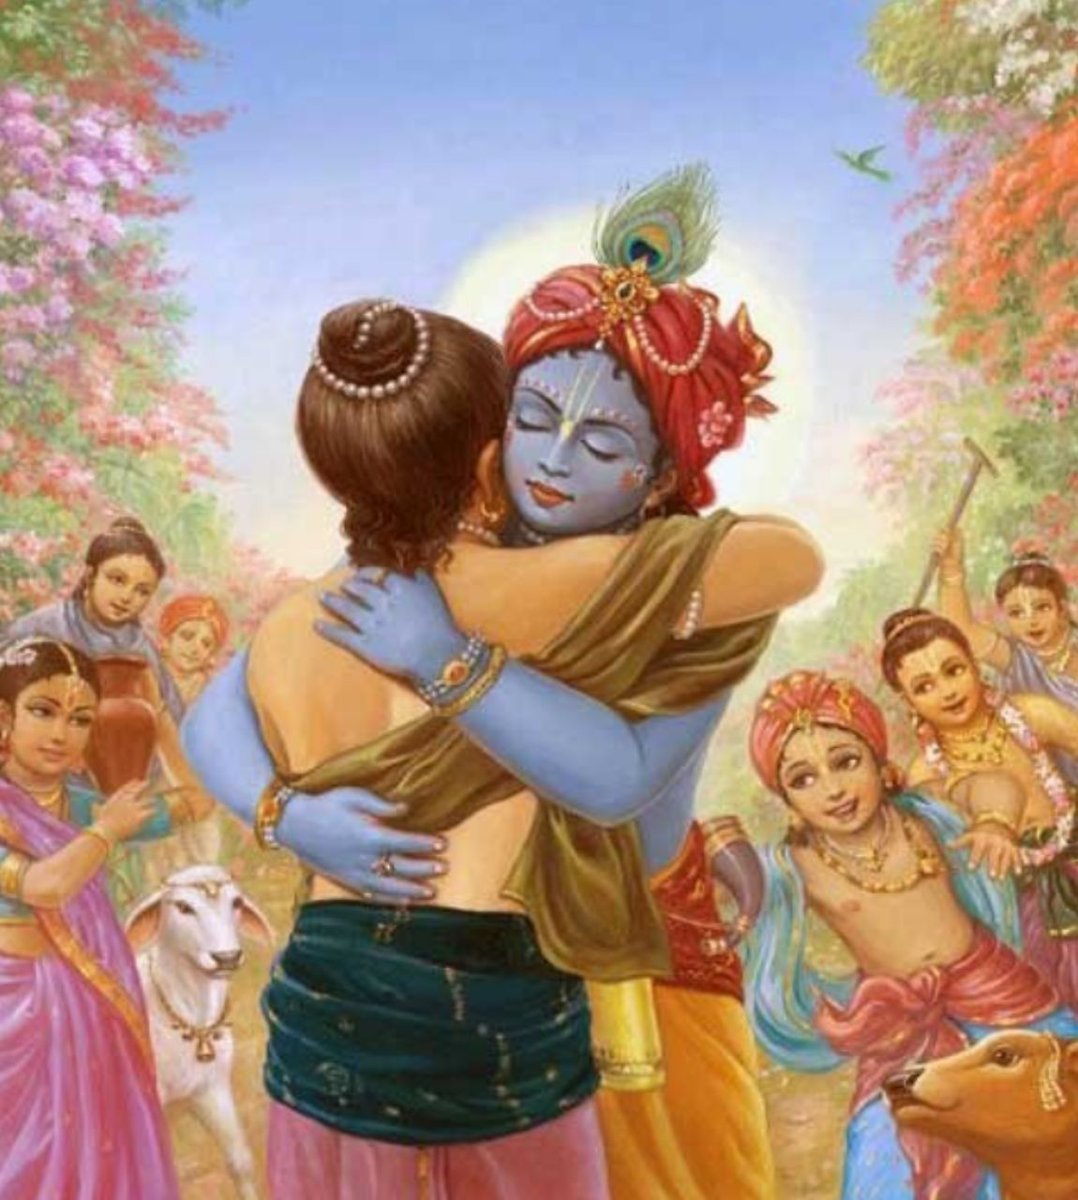 Krishna was friend Sudama and Arjuna. When Agni asked Shri Krishna to ask for any boon after Khandav Dahan, Krishna only asked that his bond with Arjuna keep increasing and they remain friends till the end.